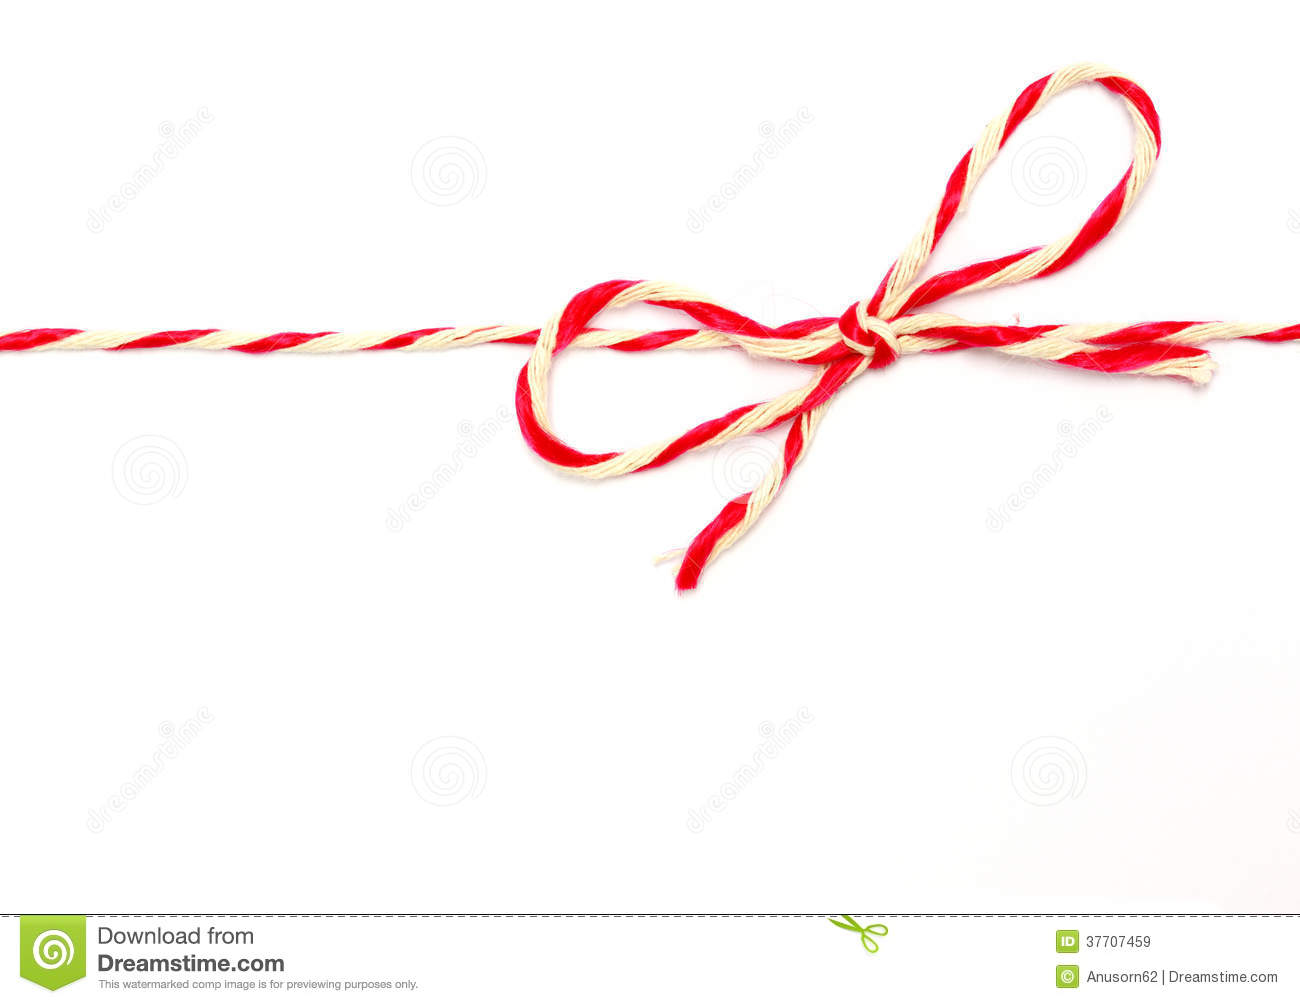 String Tied In A Bow Royalty Free Stock Images   Image  37707459